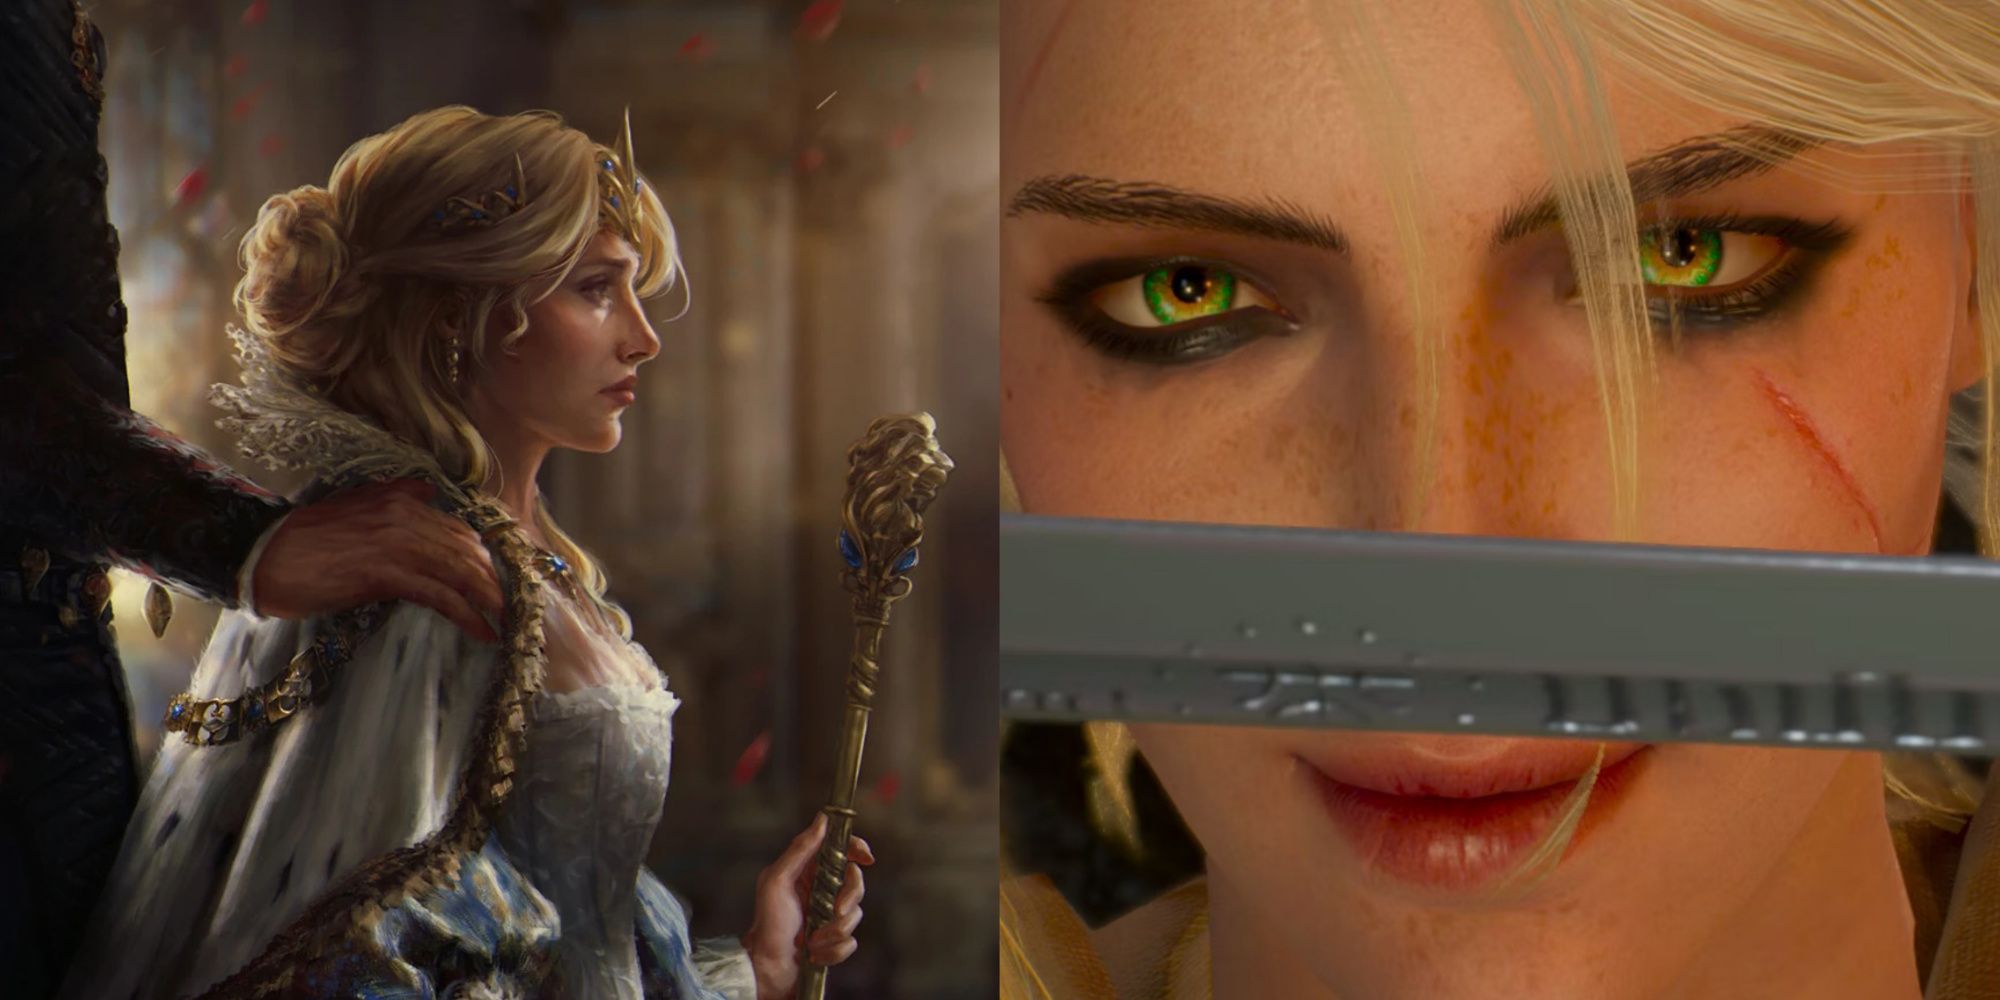 Who Ciri ends up with?